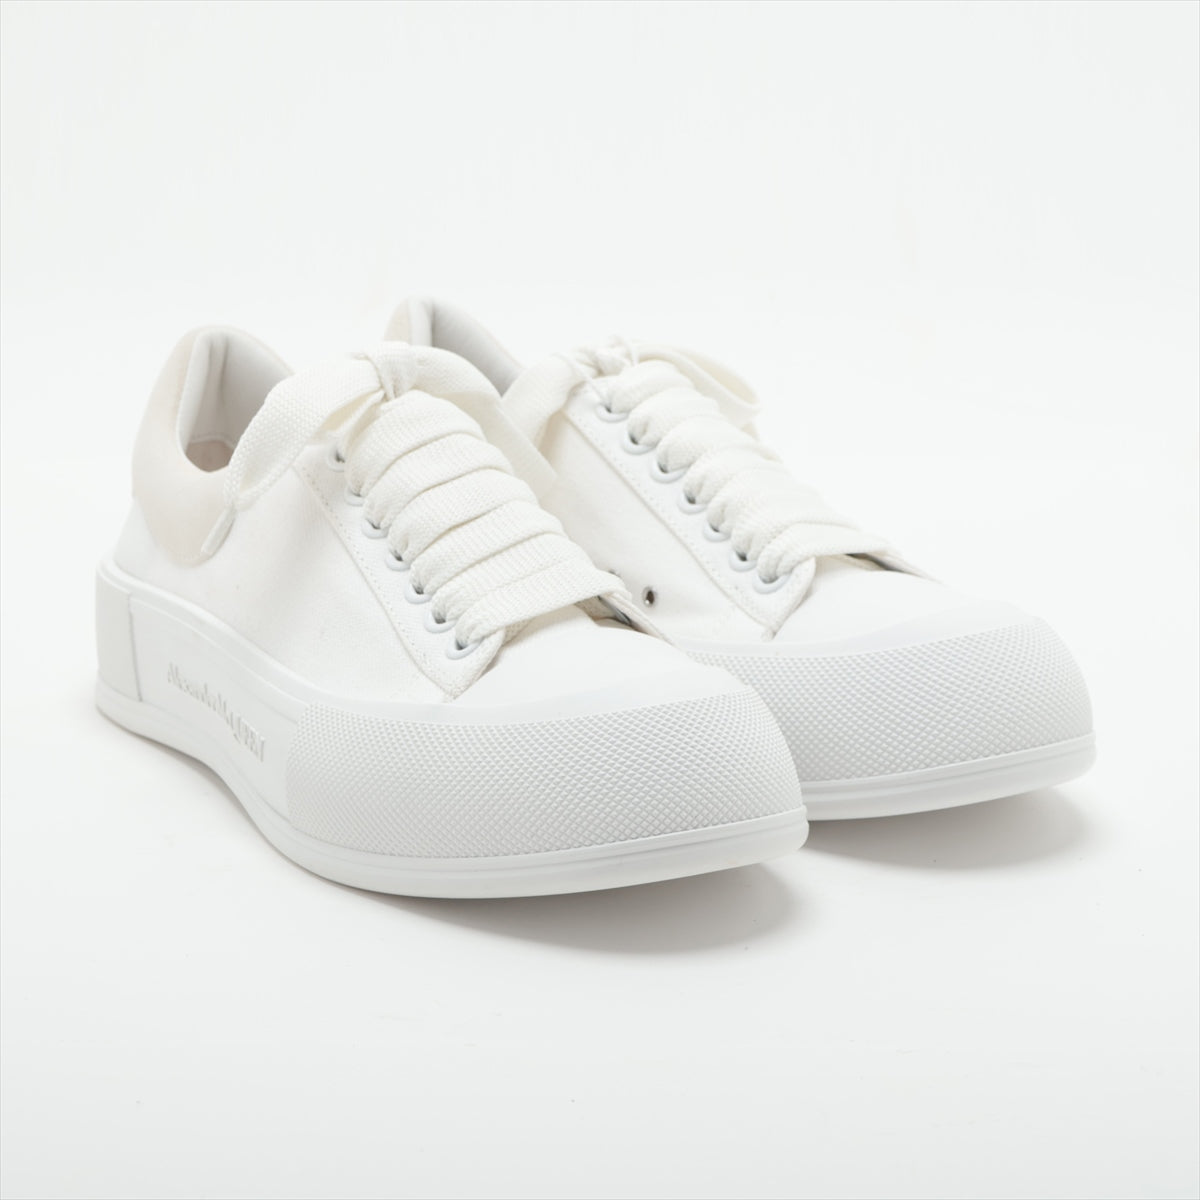 Alexander McQueen Canvas & leather Sneakers 39 Ladies' White 654593 Is there a replacement string